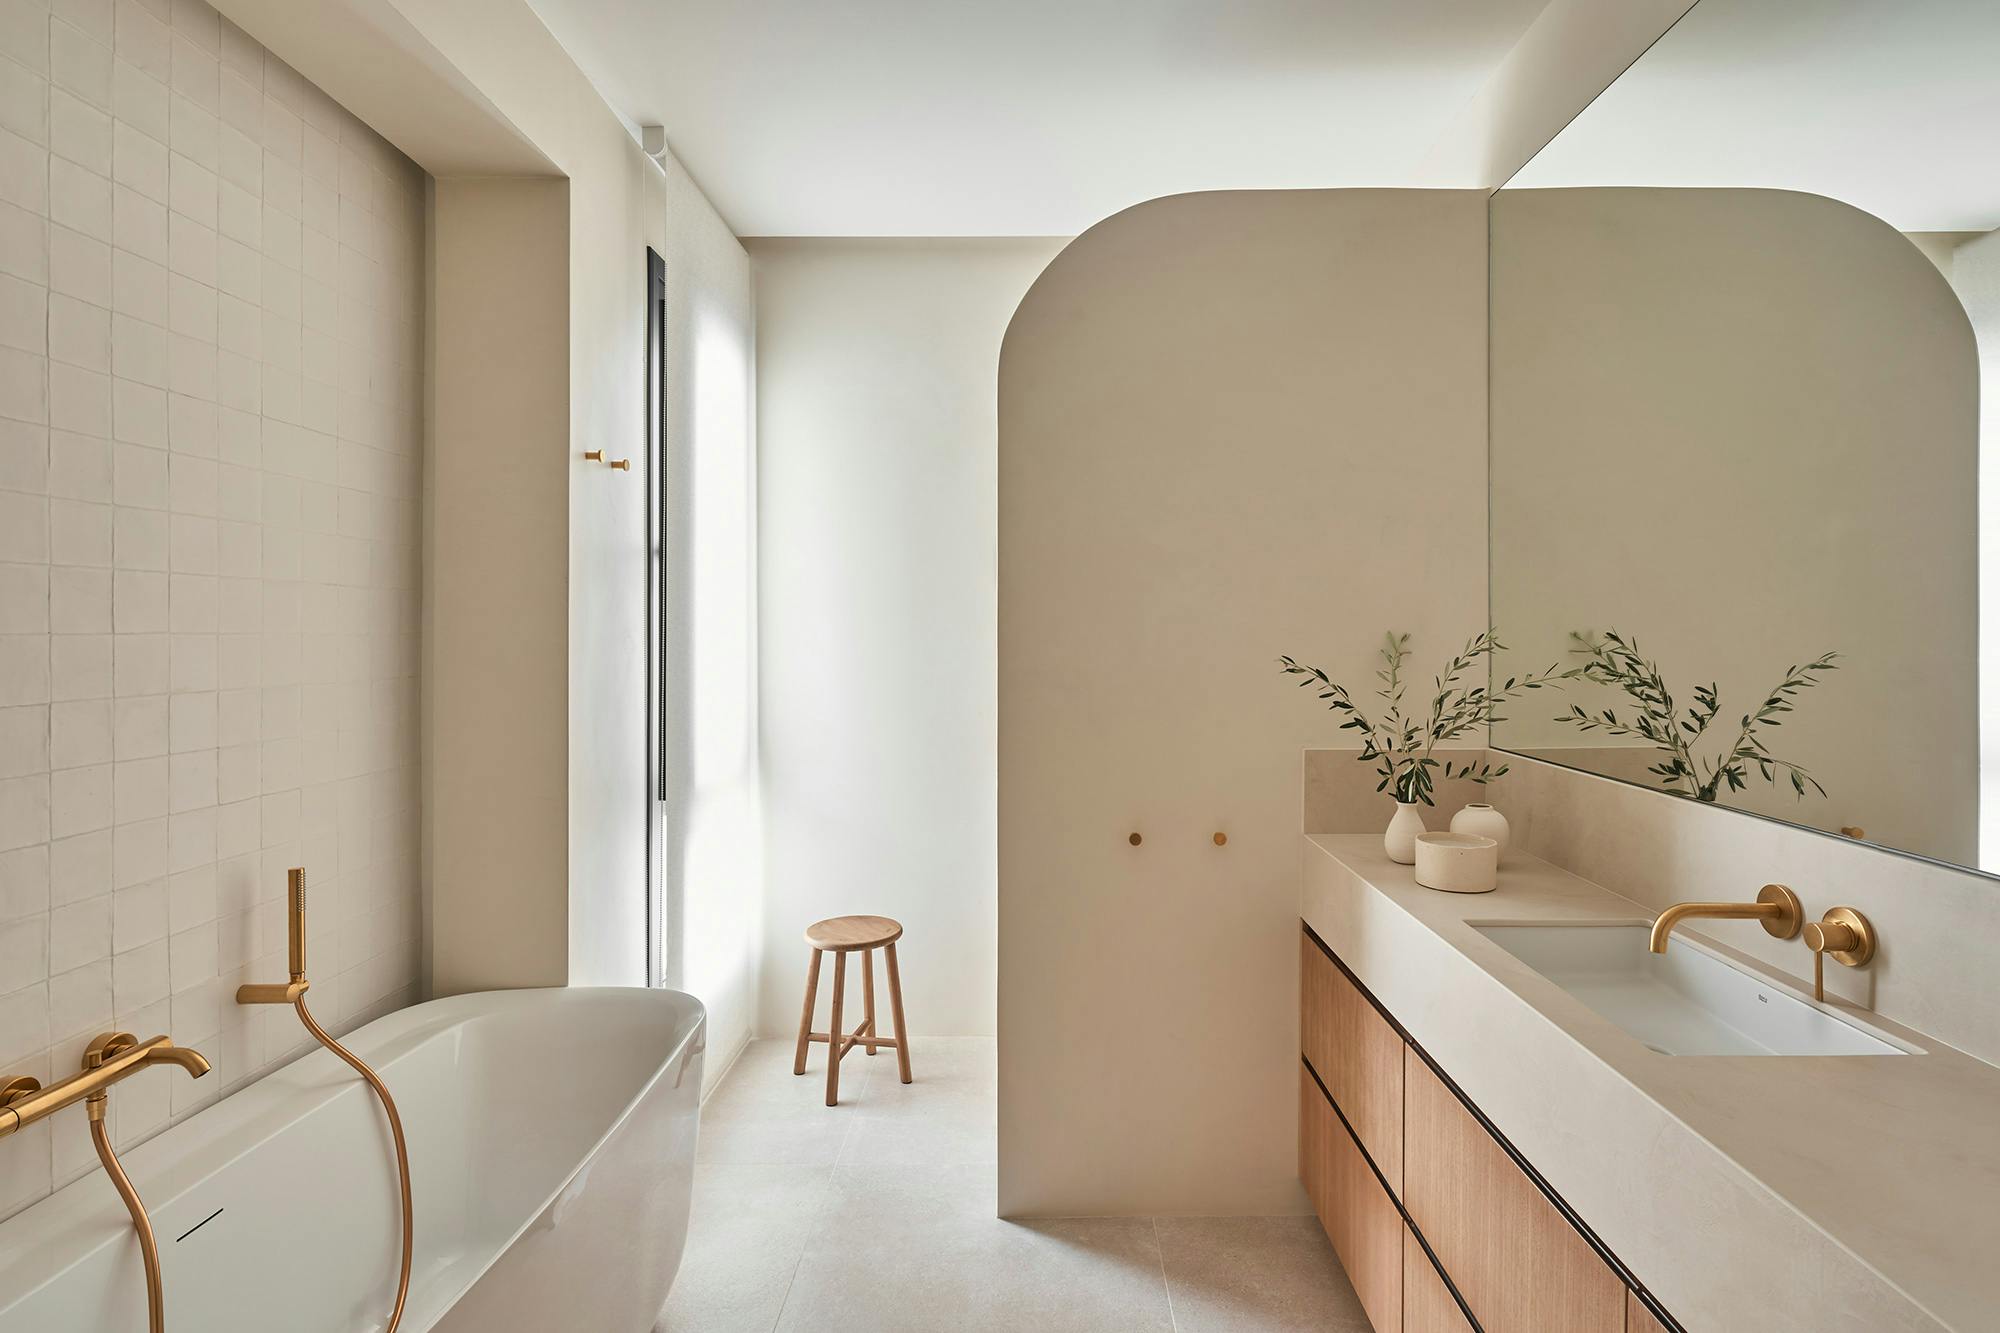 Numéro d'image 42 de la section actuelle de Cosentino was the perfect solution for the beautiful and functional kitchen and bathrooms in this lovely Sydney home de Cosentino France